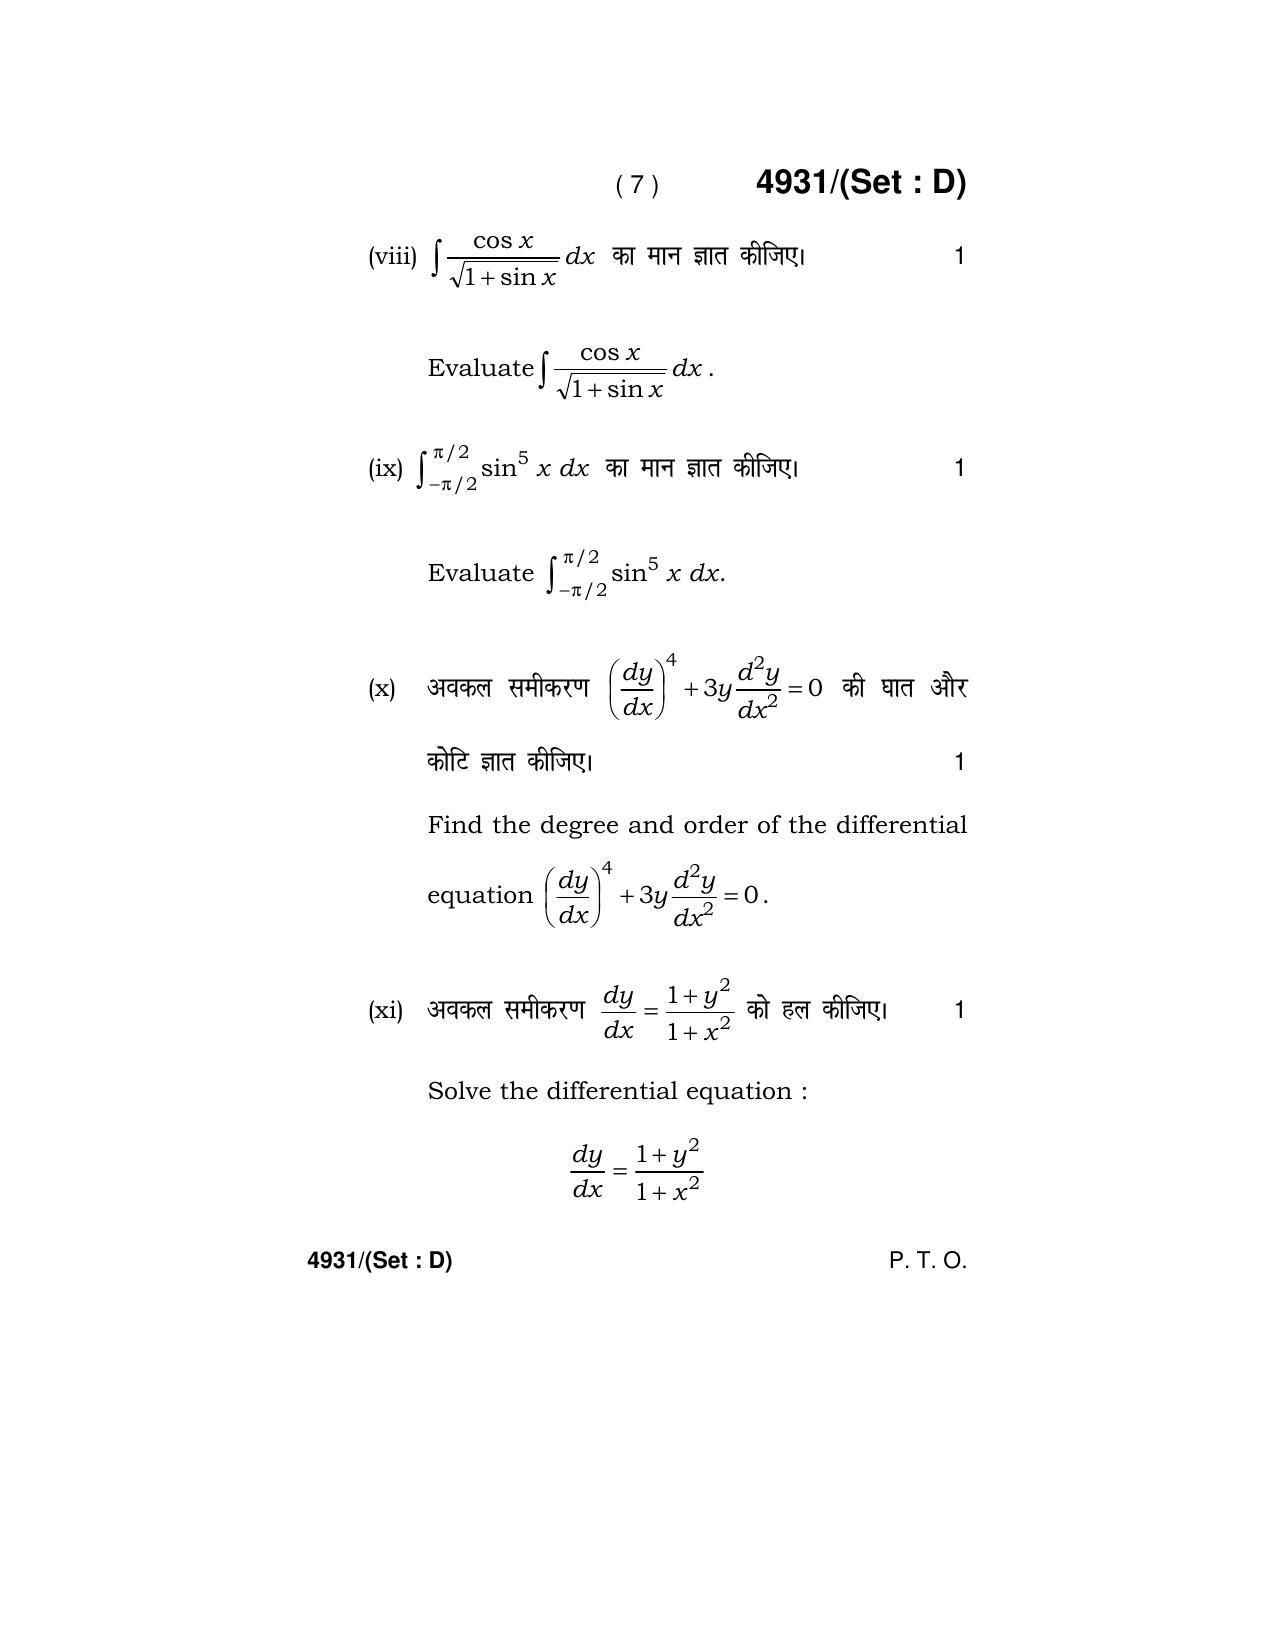 Haryana Board HBSE Class 12 Mathematics 2020 Question Paper - Page 55